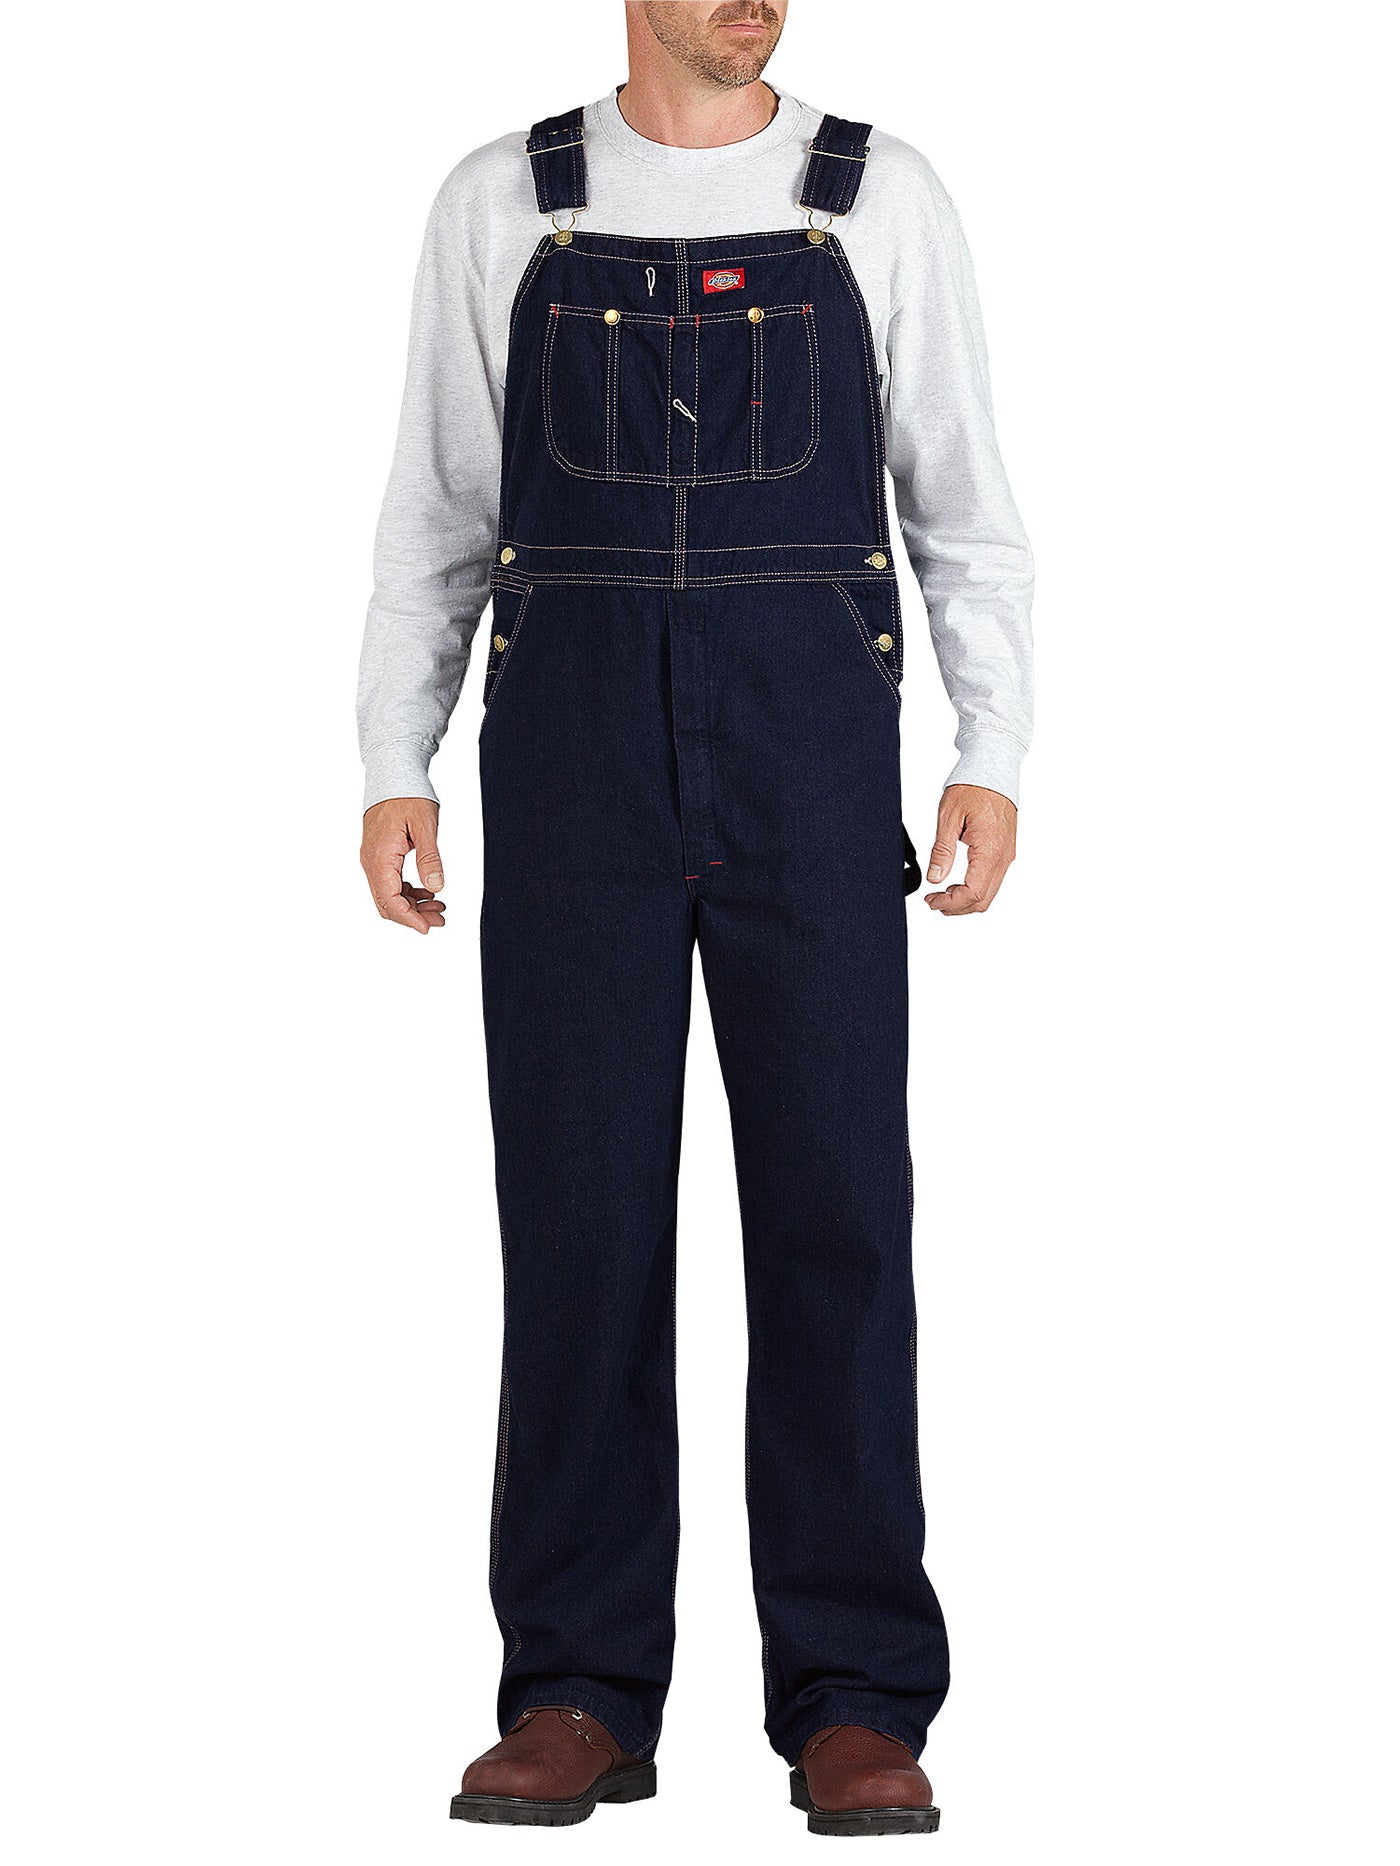 Dickies Duck Bib Overall Jeans